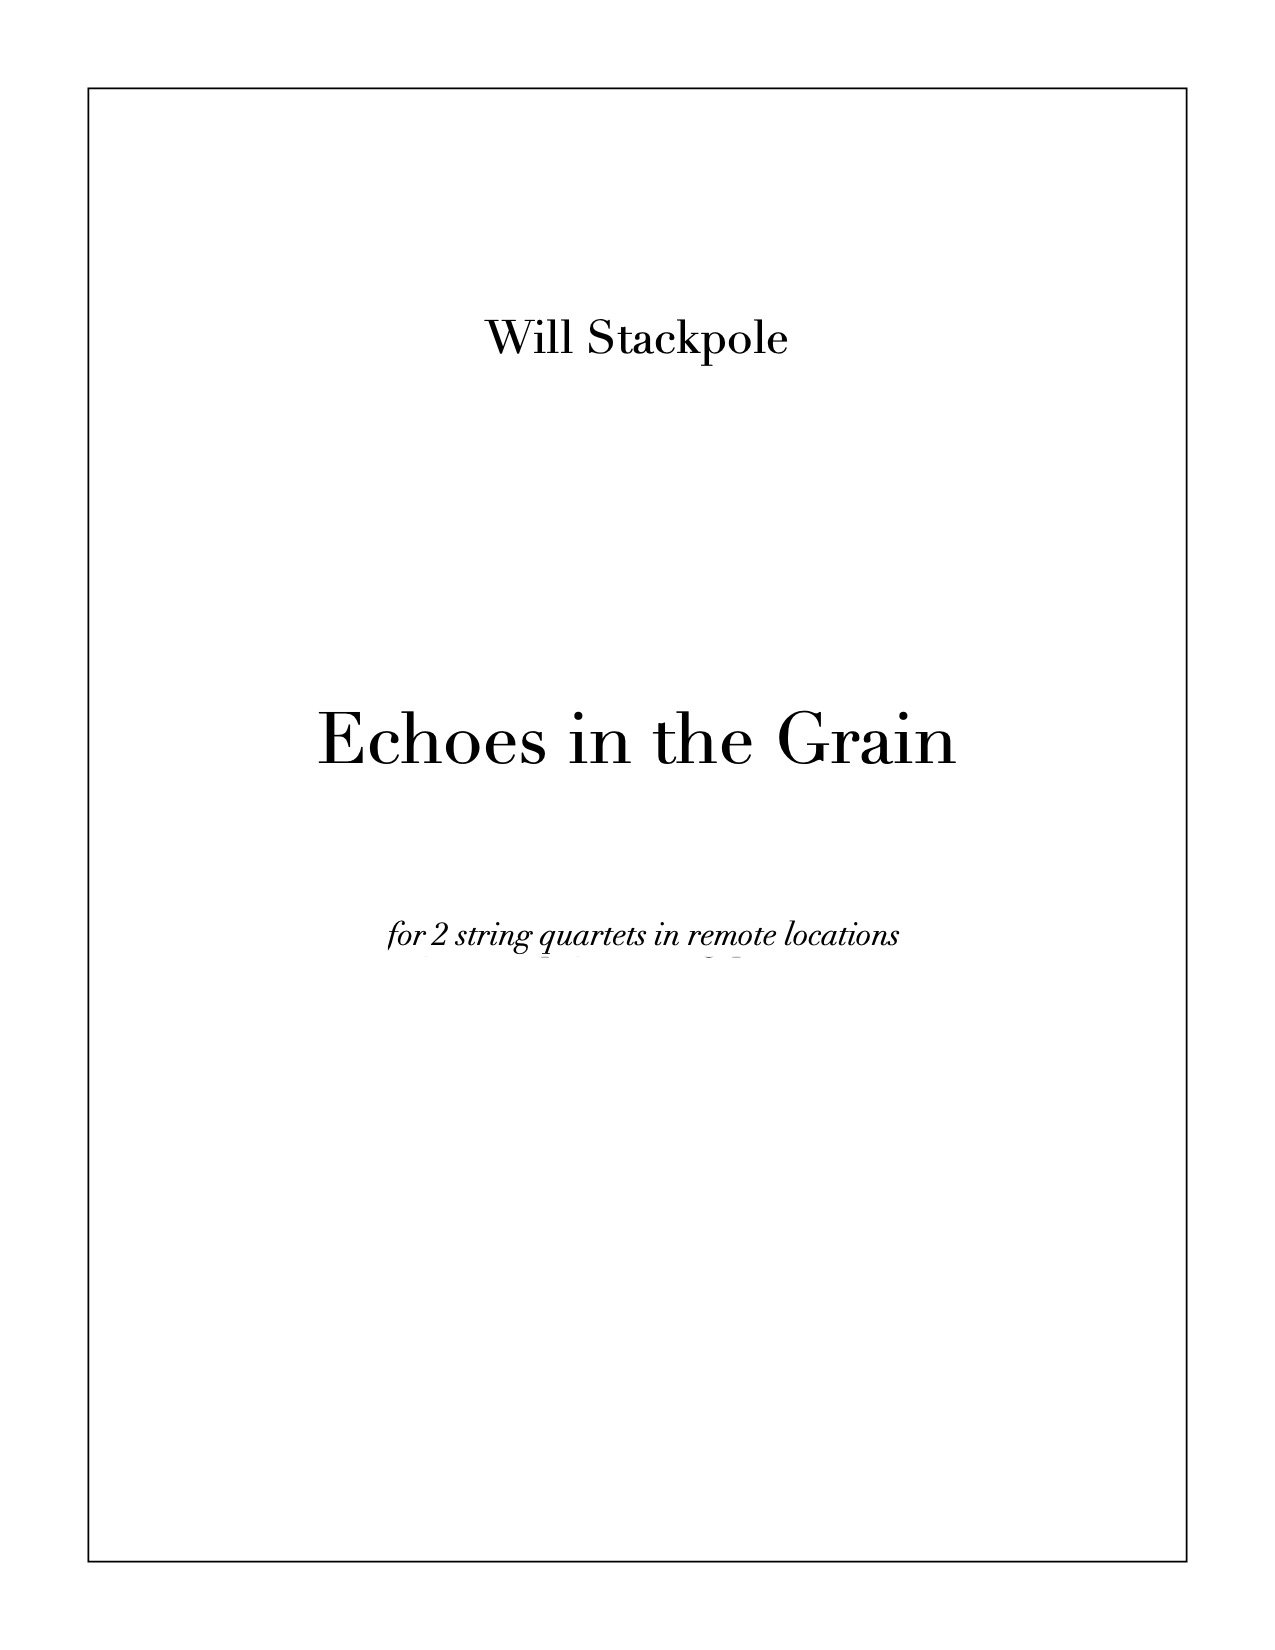 Echoes in the Grain 1.jpeg